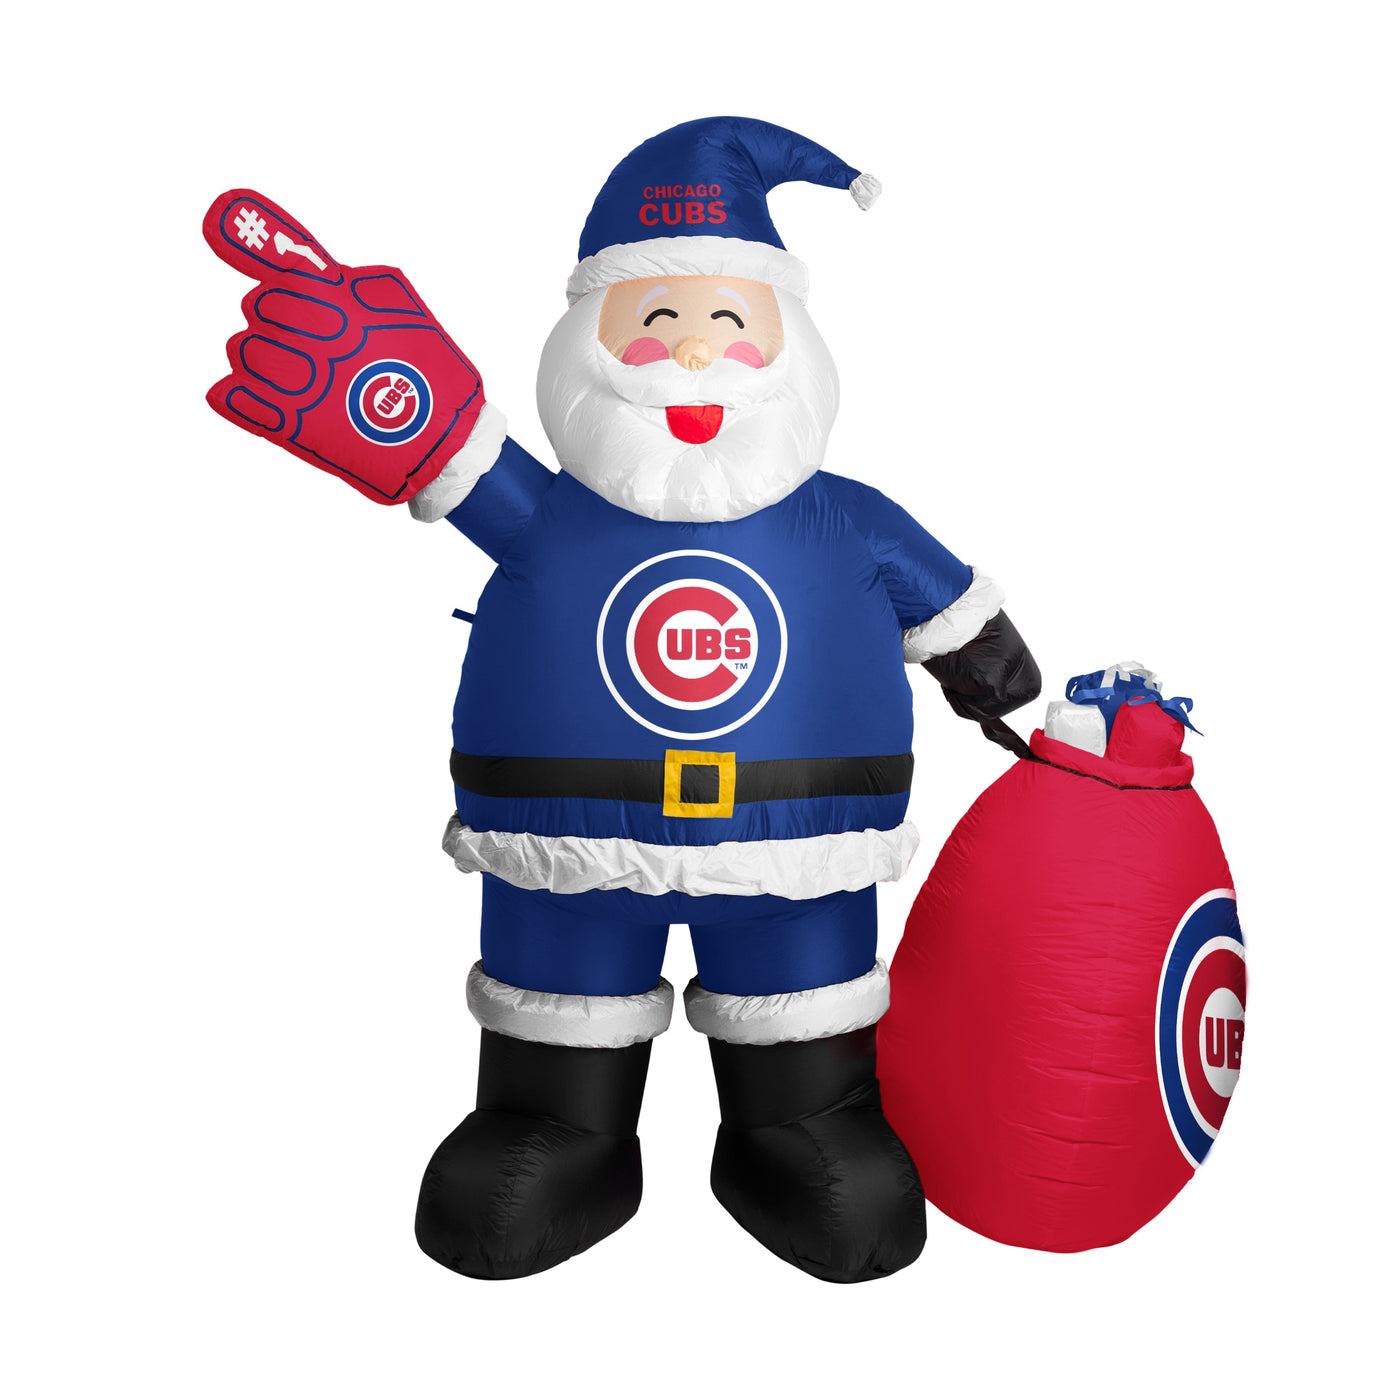 Chicago Cubs Santa Claus Yard Inflatable